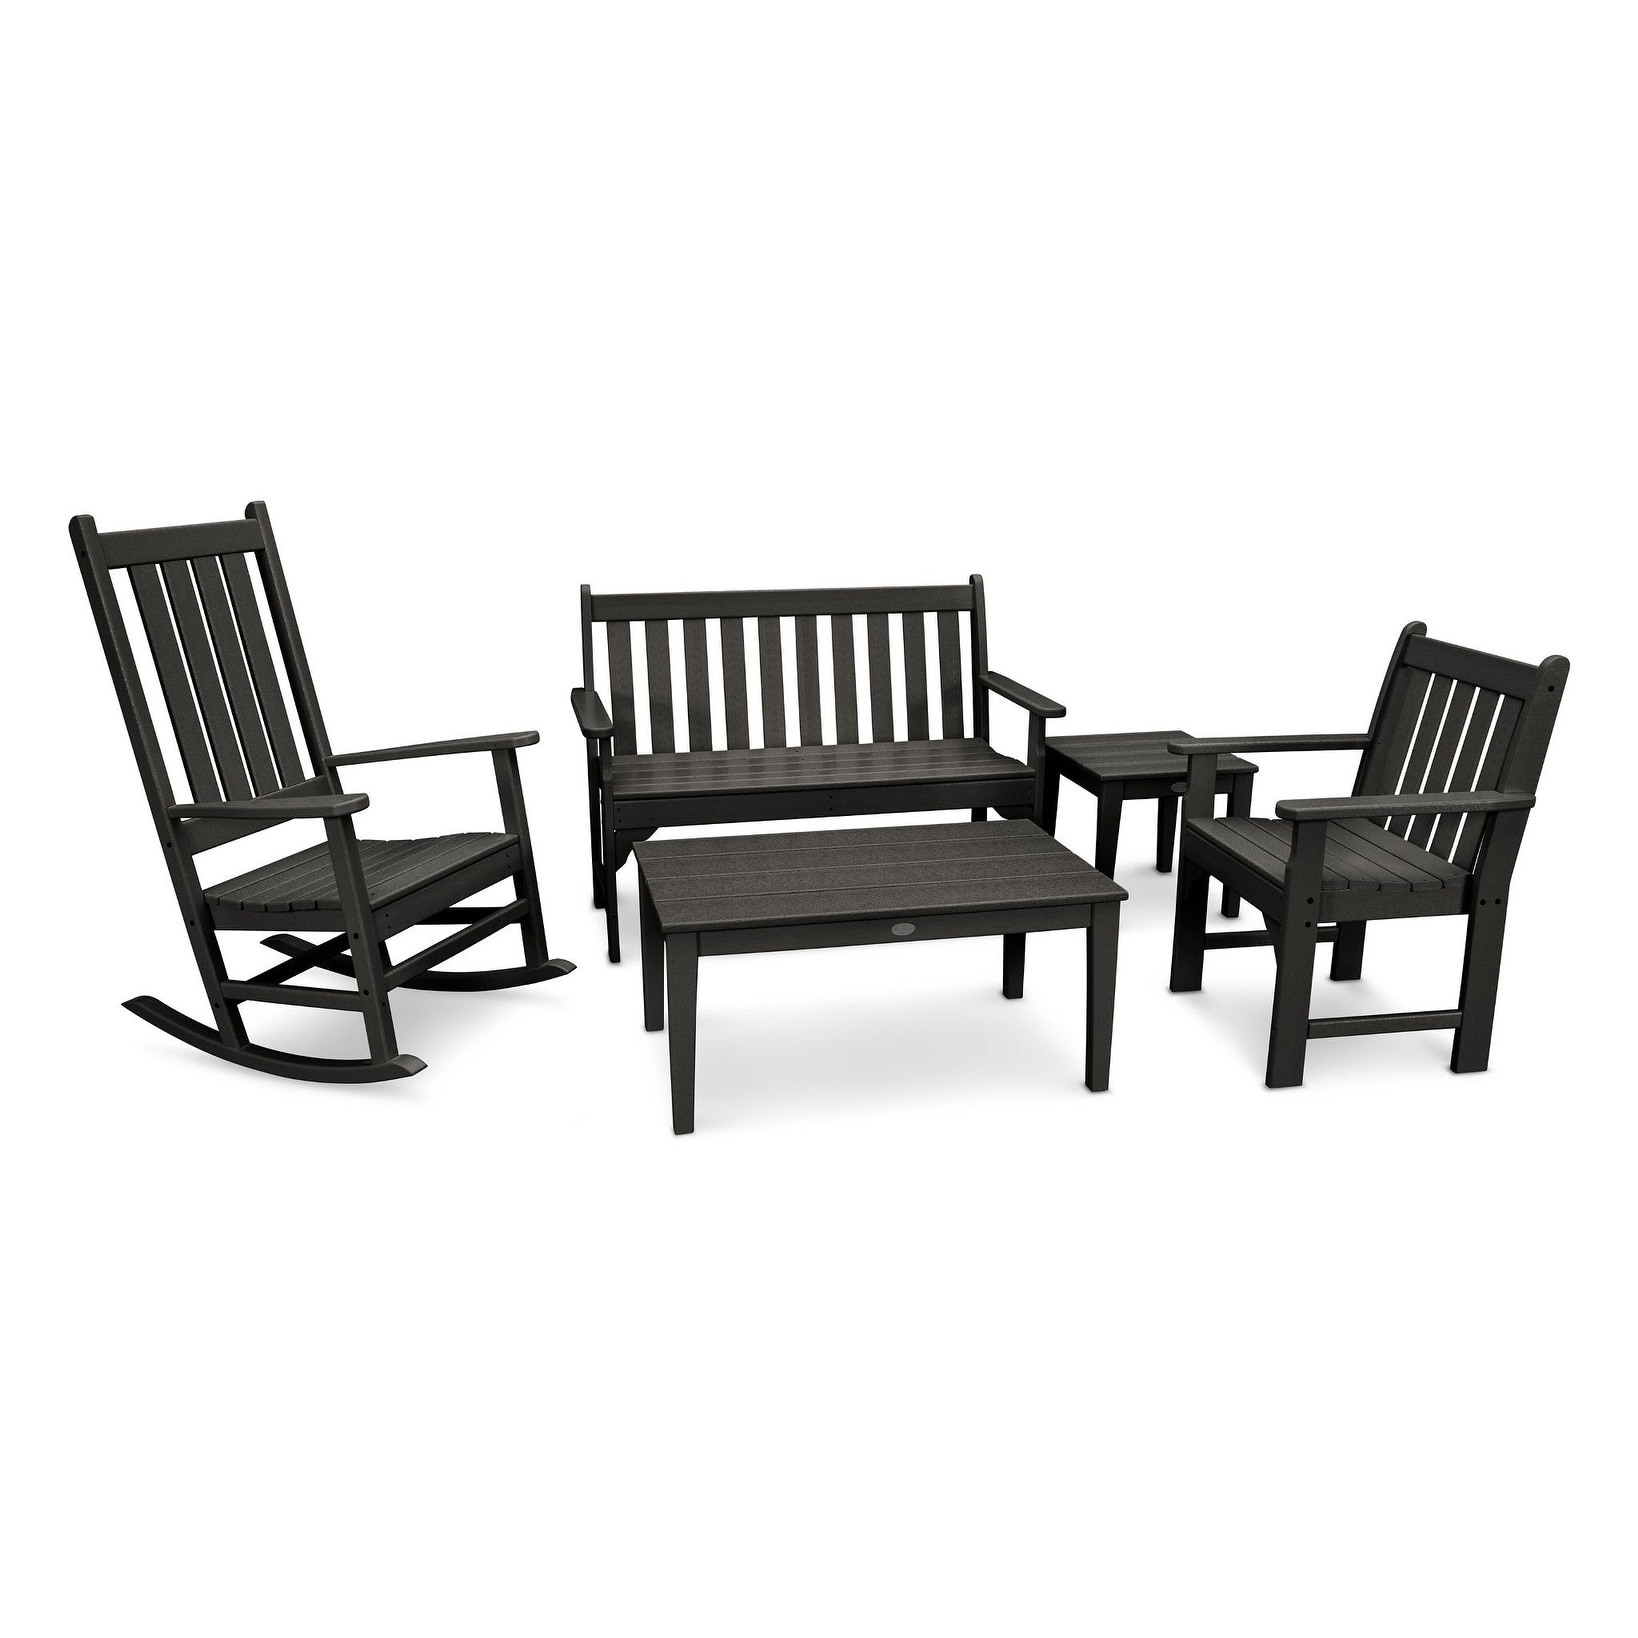 Polywood Vineyard 5-piece Outdoor Bench And Rocking Chair Set